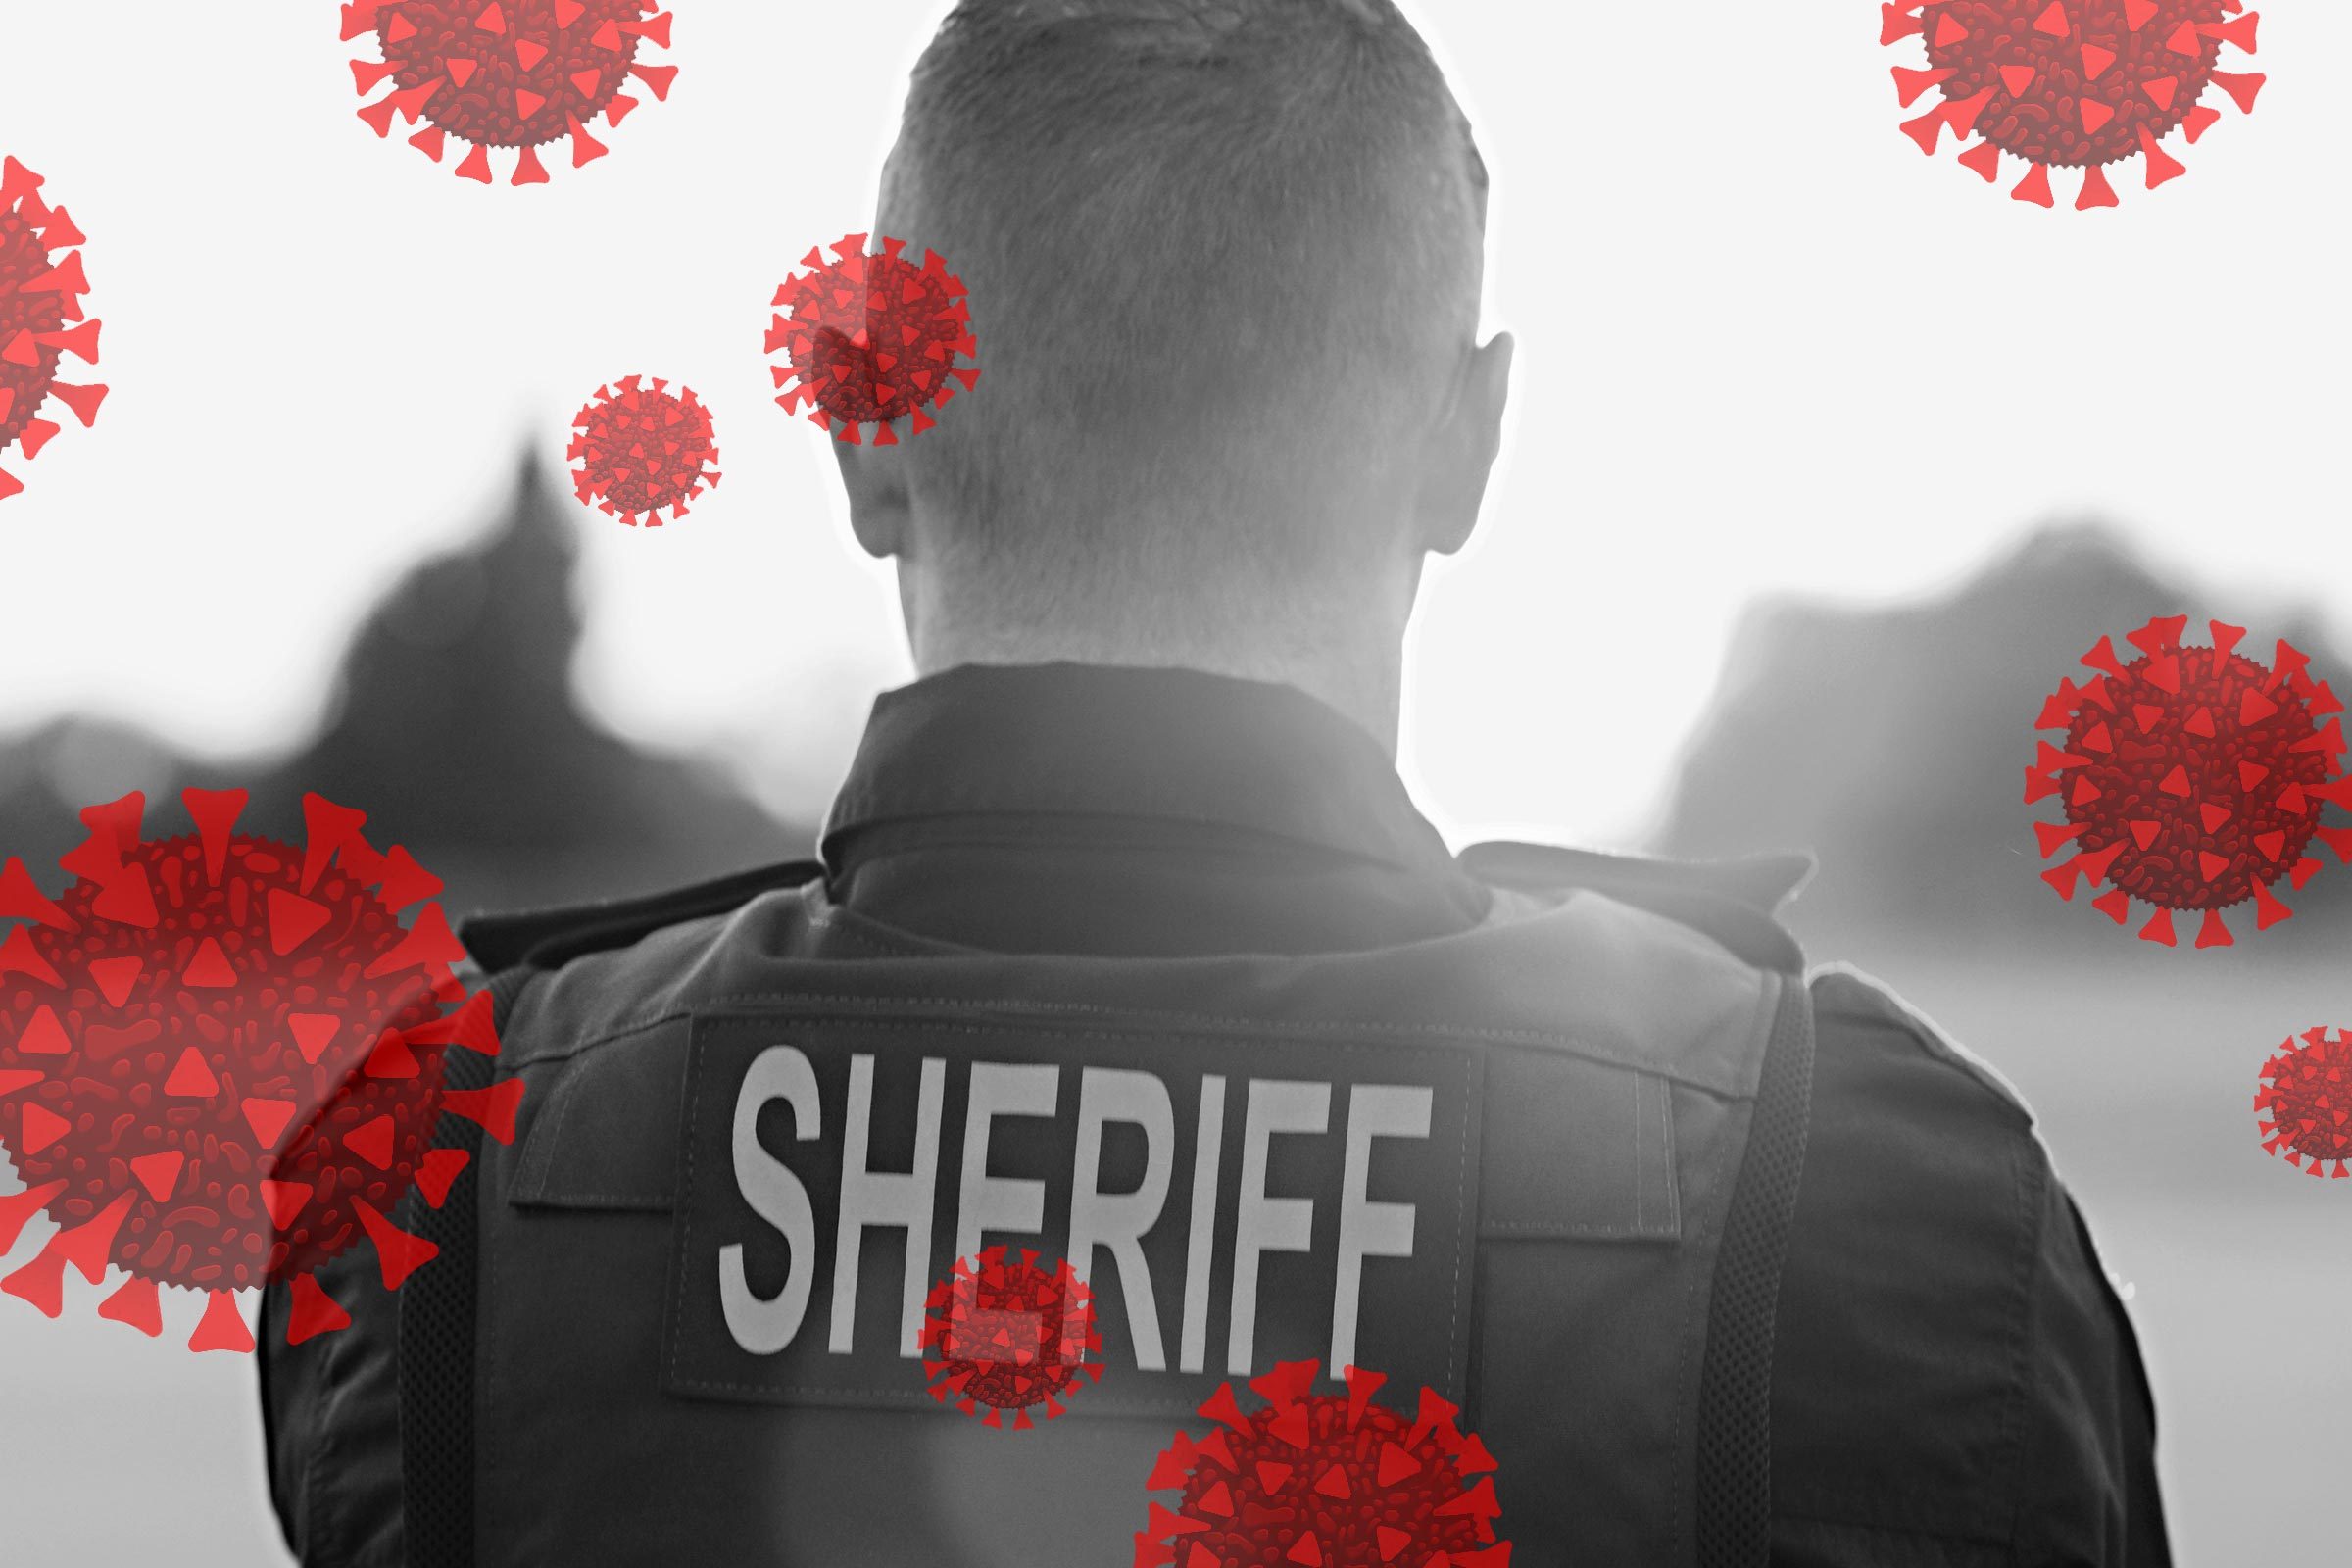 A sheriff discovers the virus doesn't care about politics